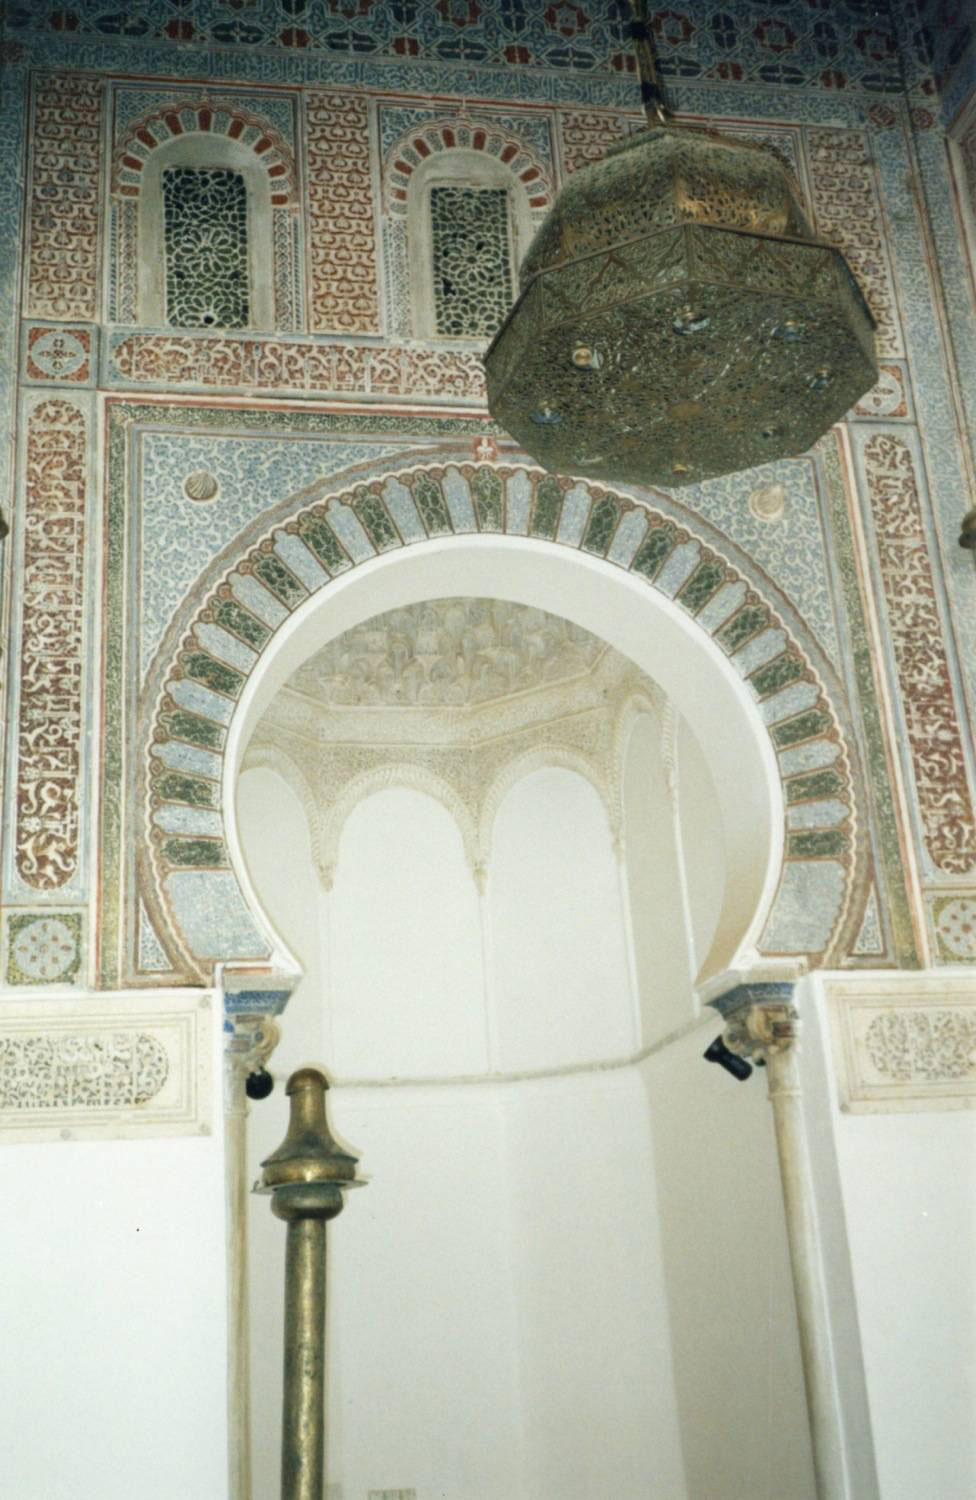 Mihrab of the mosque, decorated with carved stucco in calligraphic and floral motifs